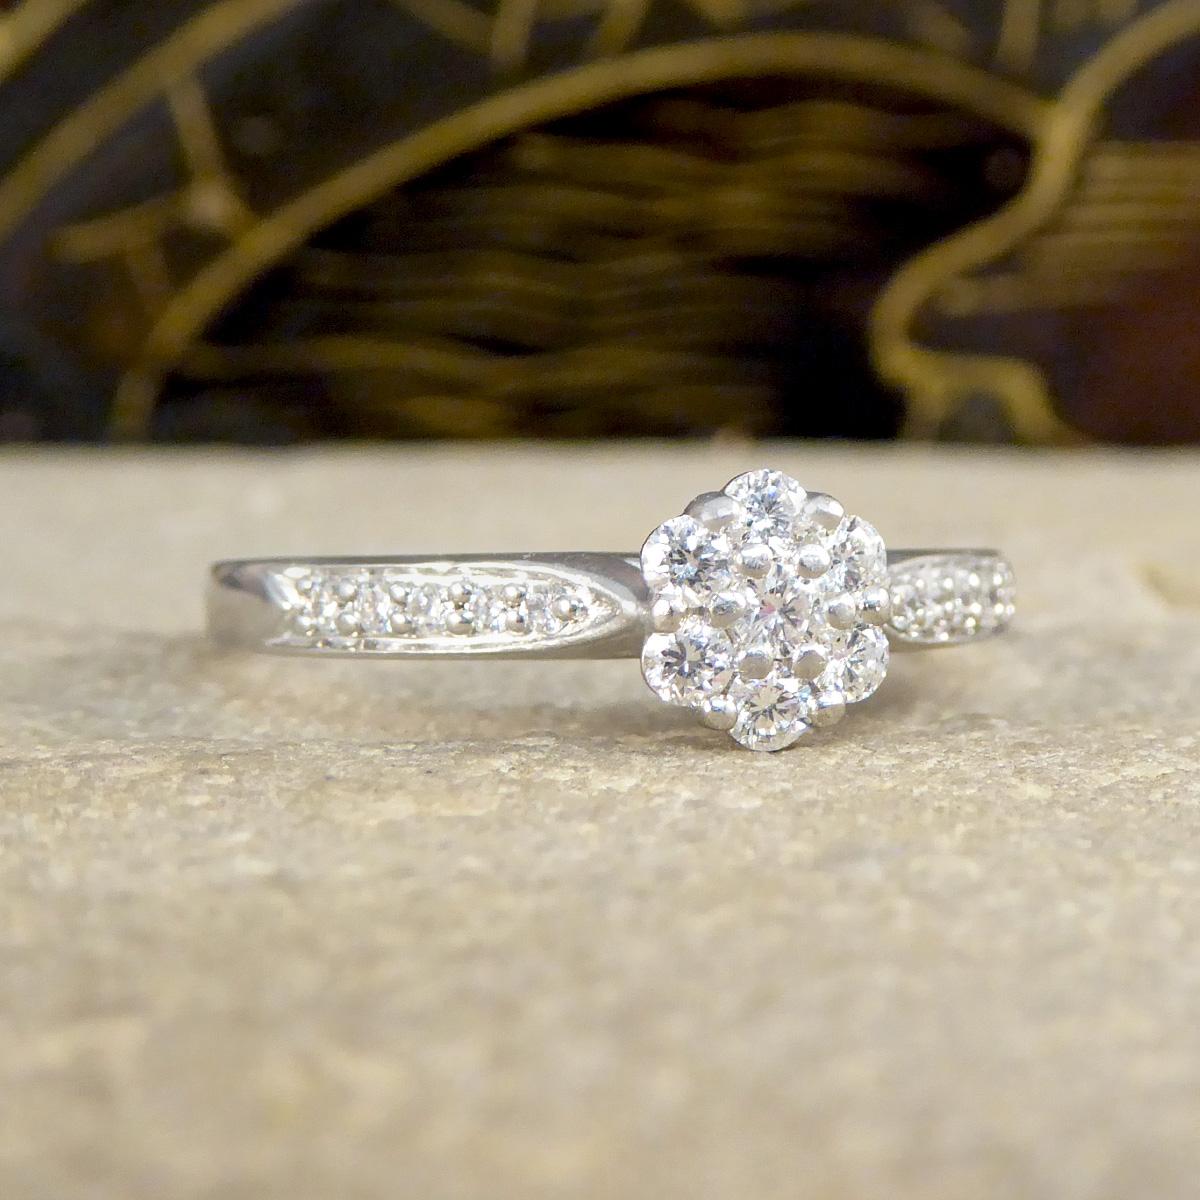 Embrace the delicate charm and exceptional elegance of this Daisy Diamond cluster ring. Crafted in the finest platinum, this exquisite ring features a dazzling cluster of diamonds arranged in a charming daisy pattern, complemented by